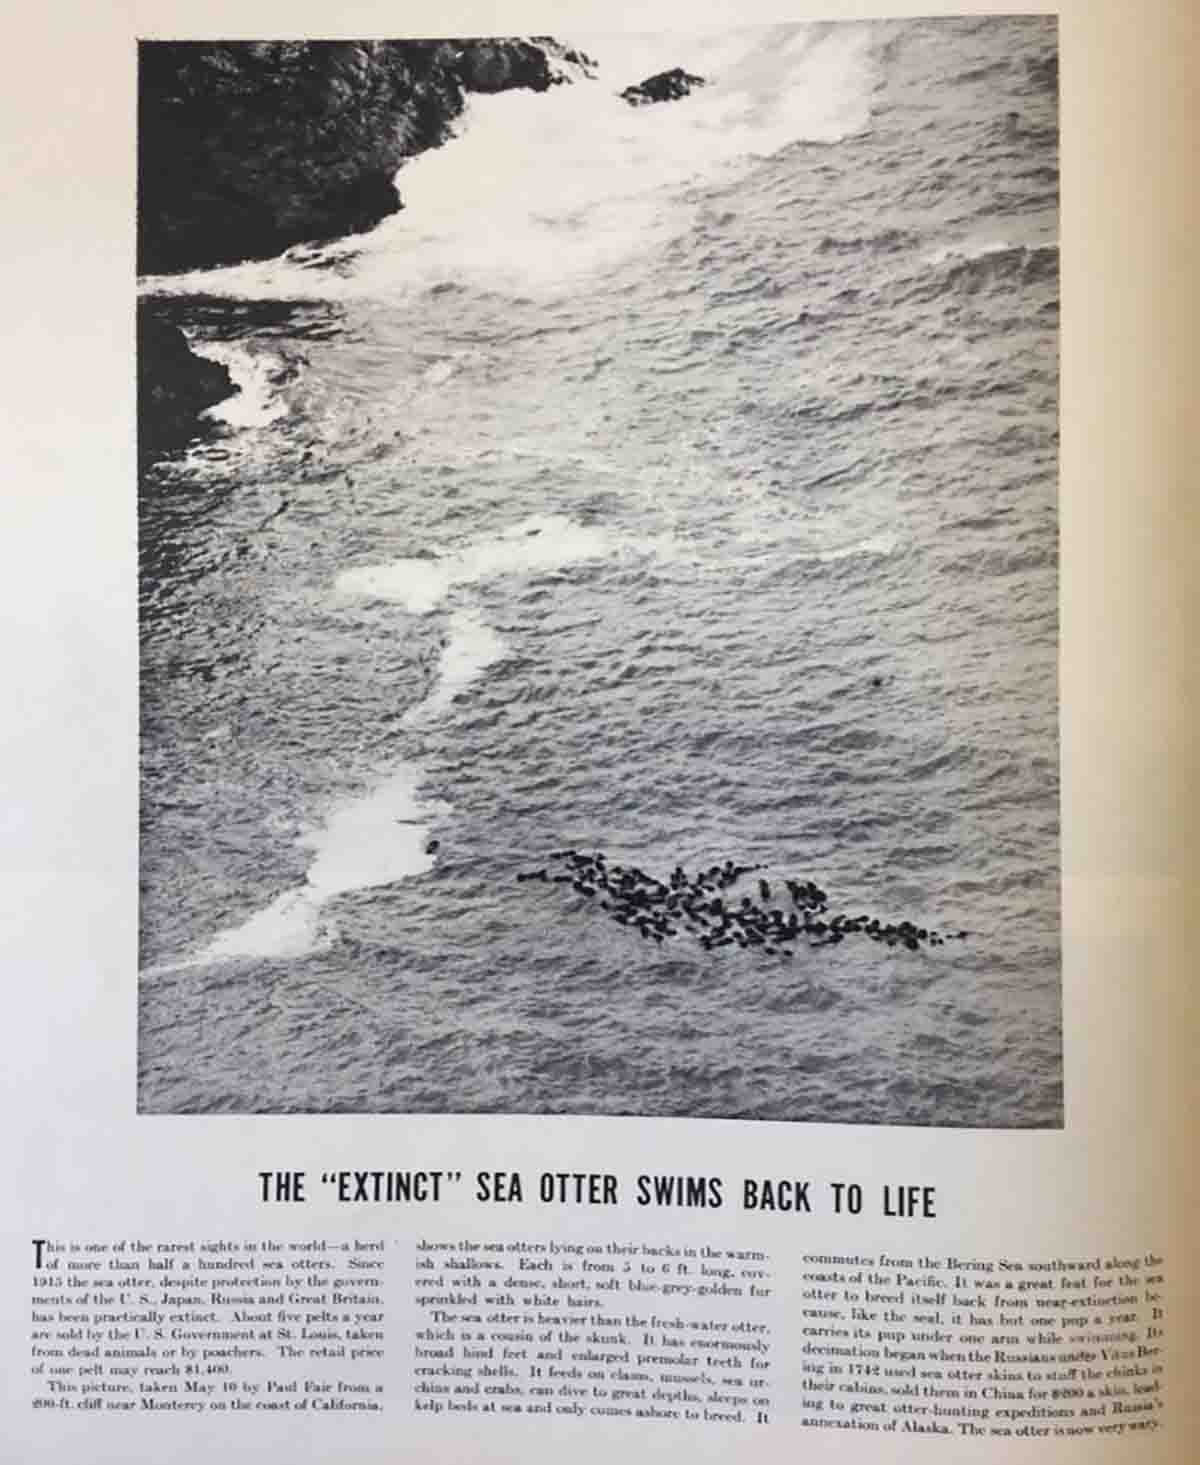 A screenshot of a black and white magazine article describing the return of sea otters